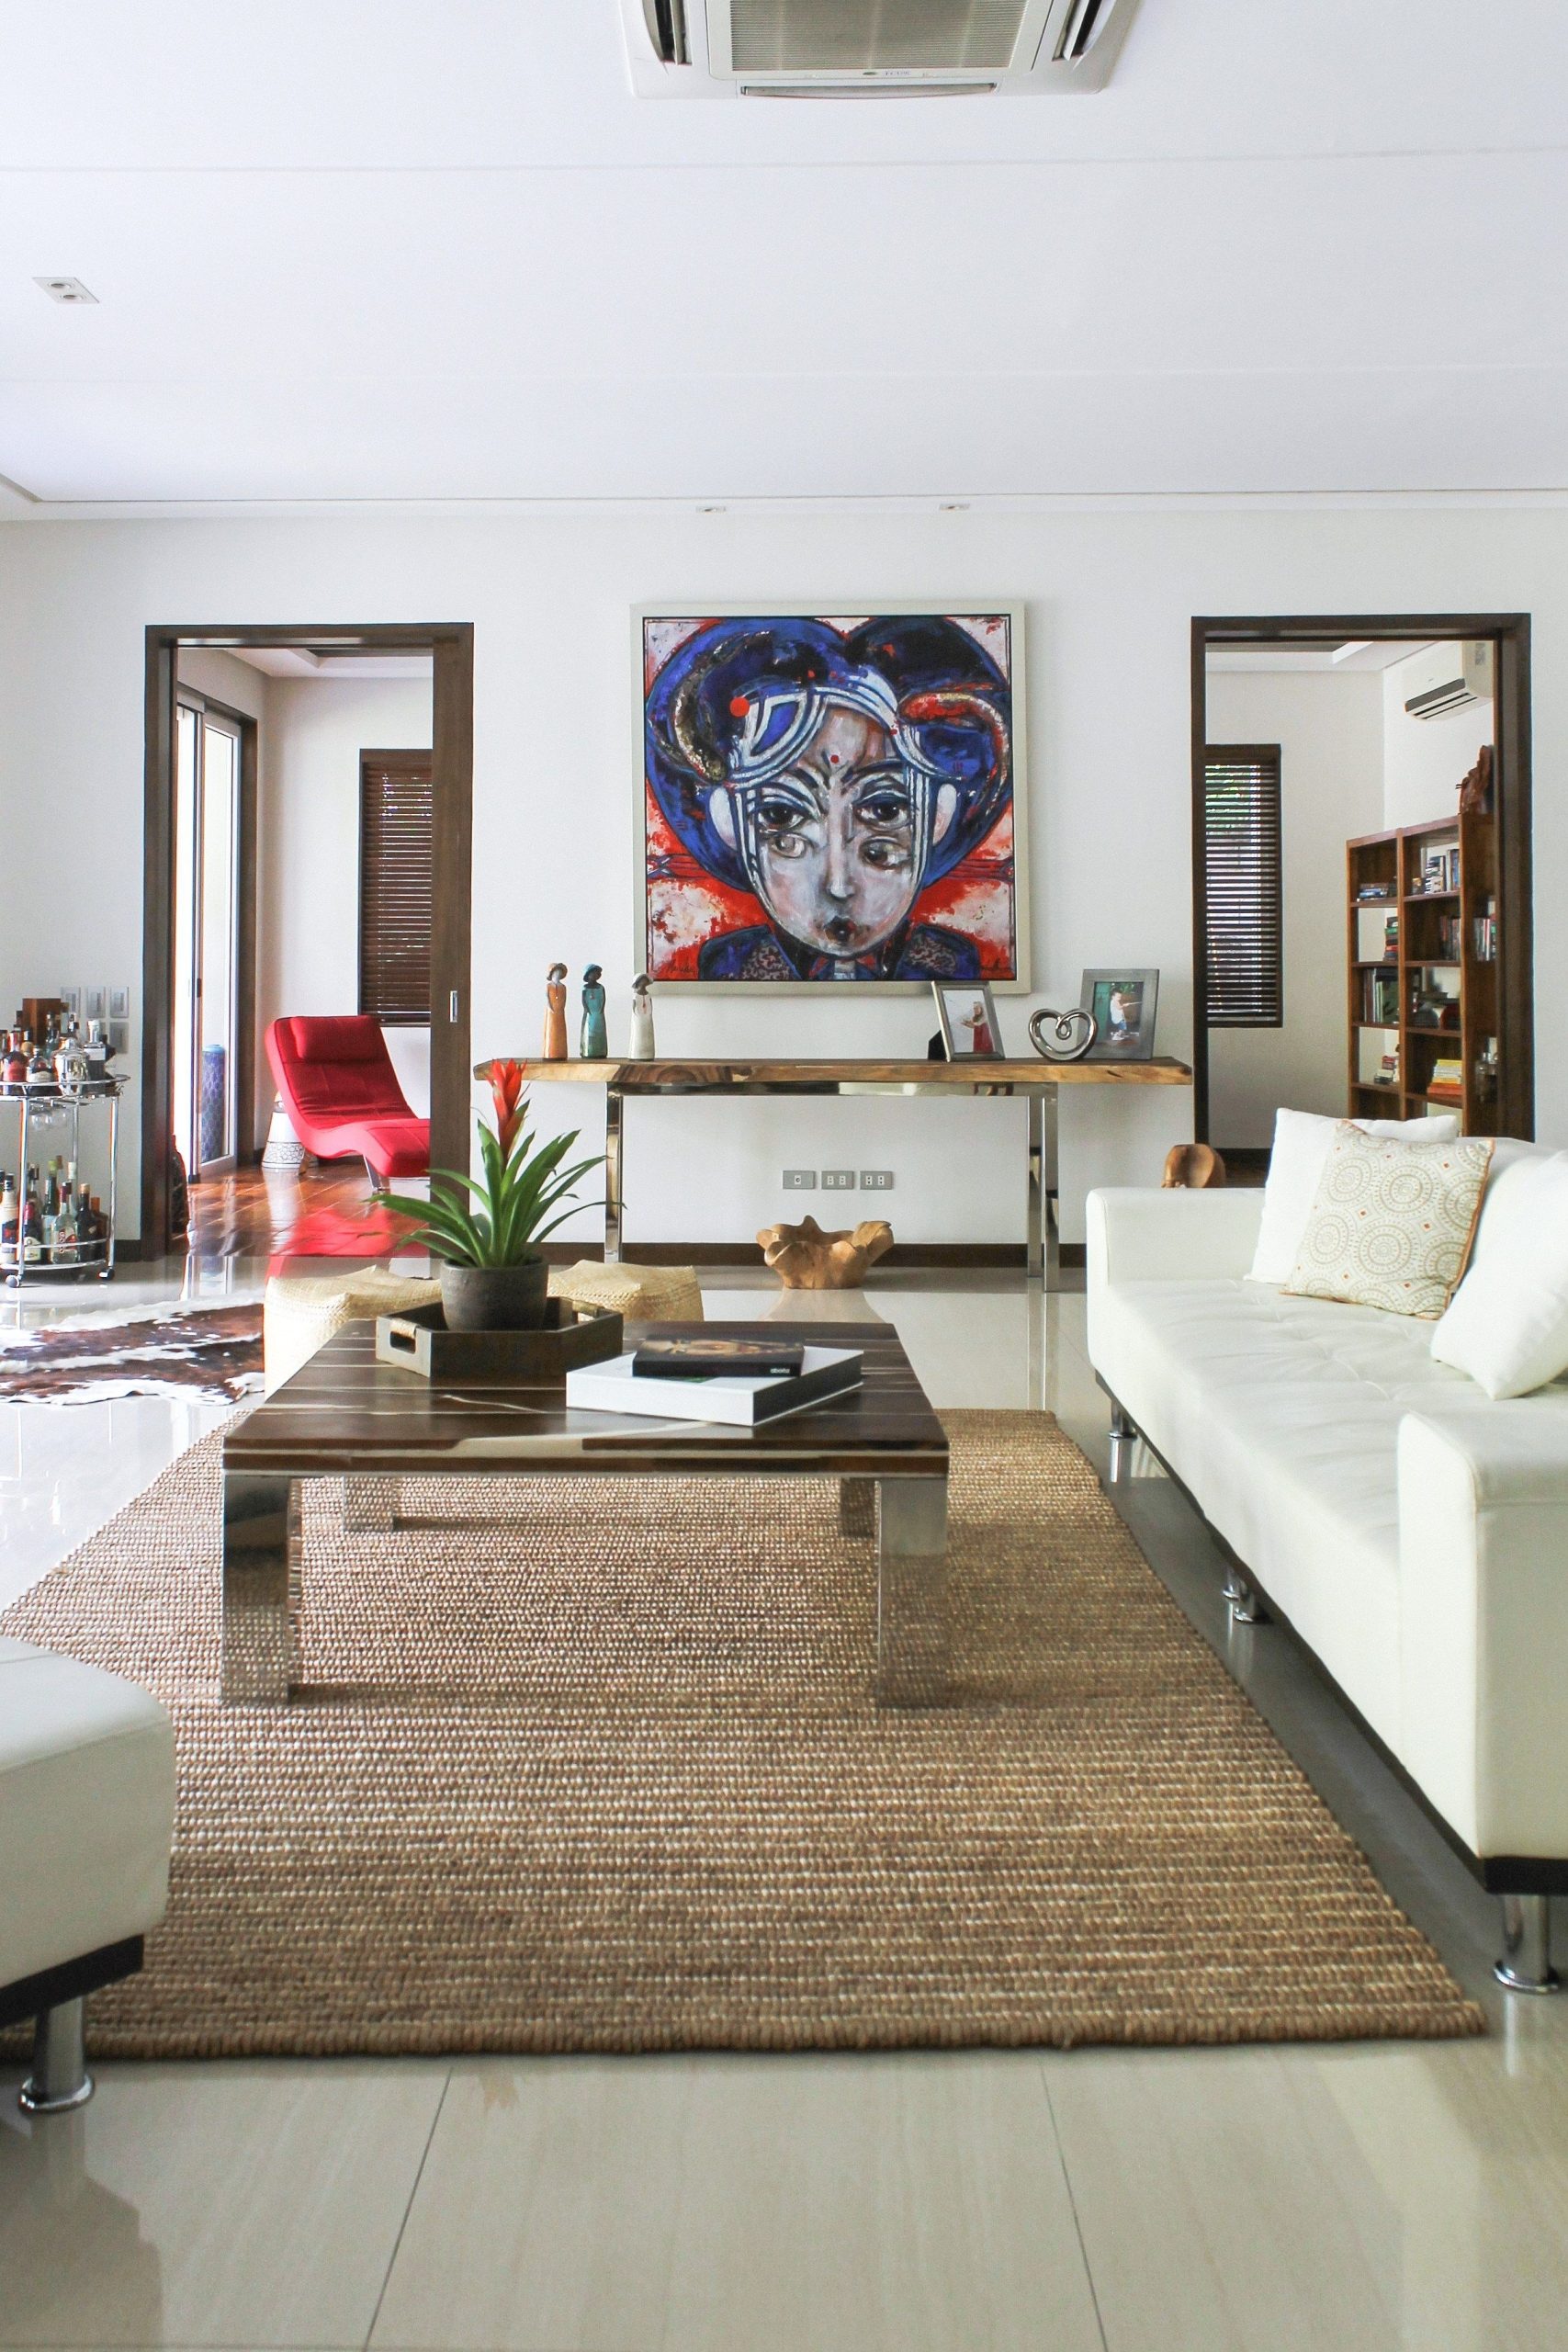 A World Inside: Global And Cultural Fusion In Modern Homes